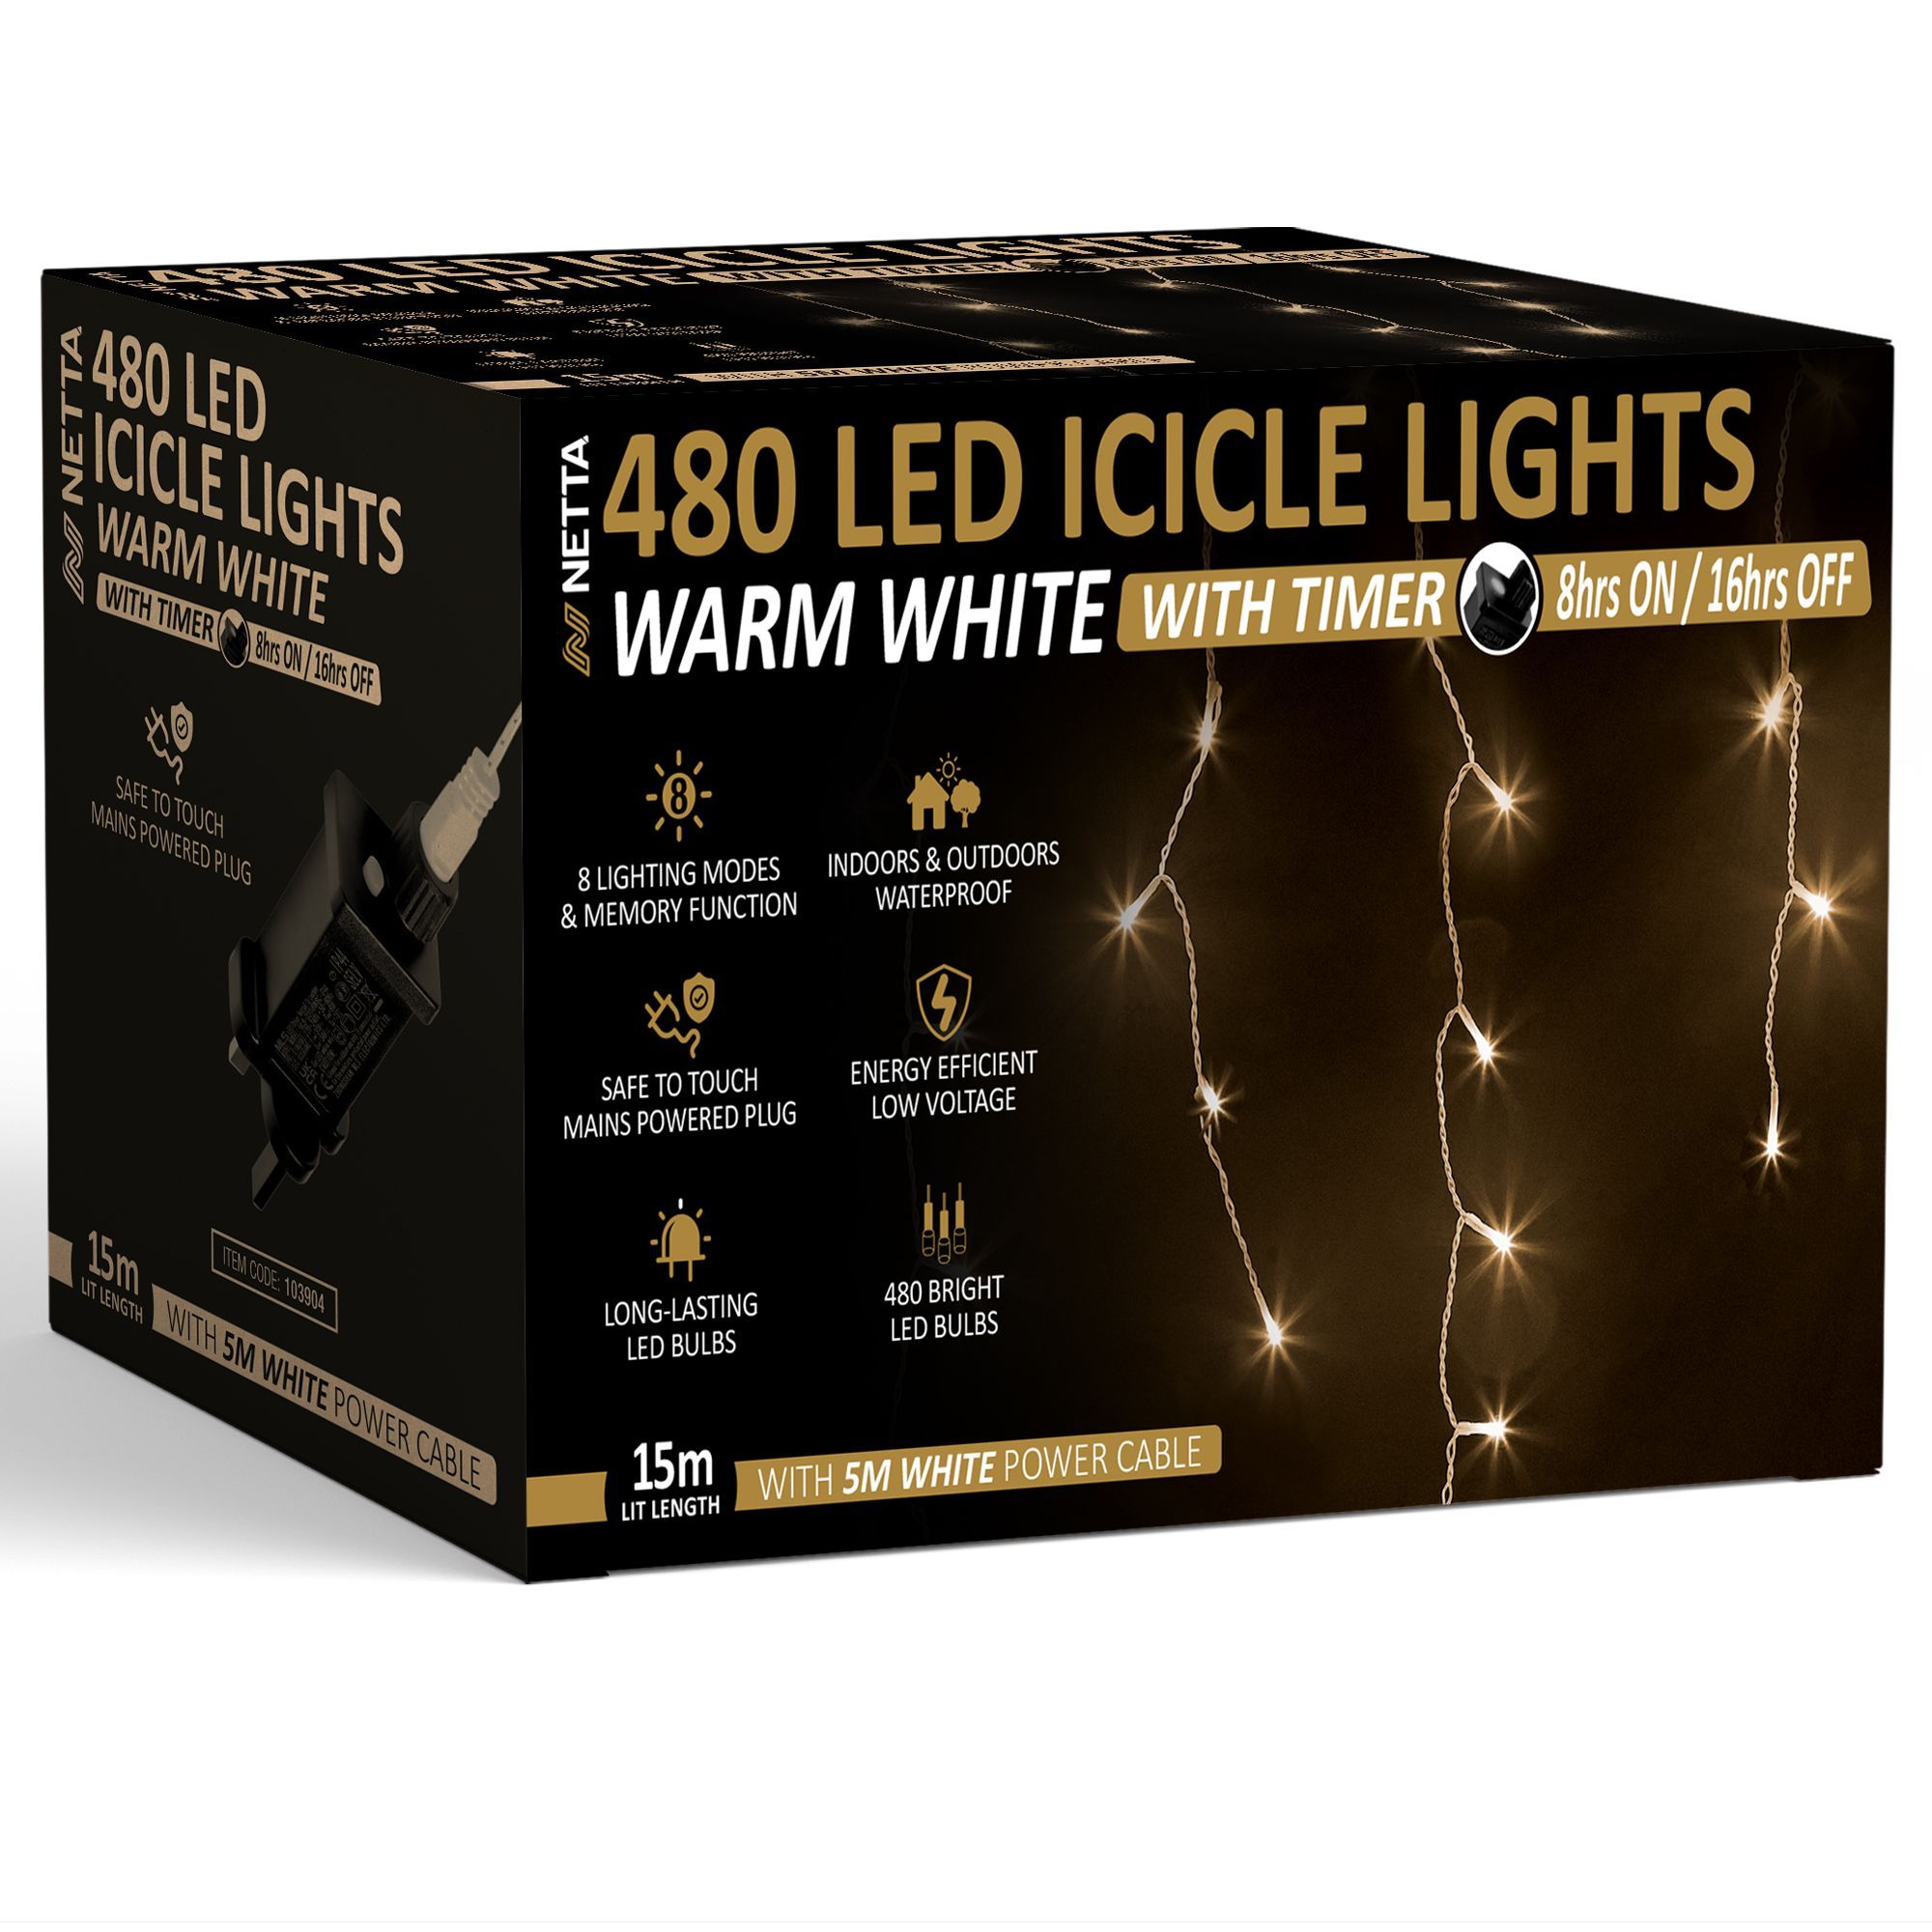 NETTA 480 LED Icicle Lights Outdoor Christmas Lights 15M Lit Length, Timer - Warm White, with White Cable